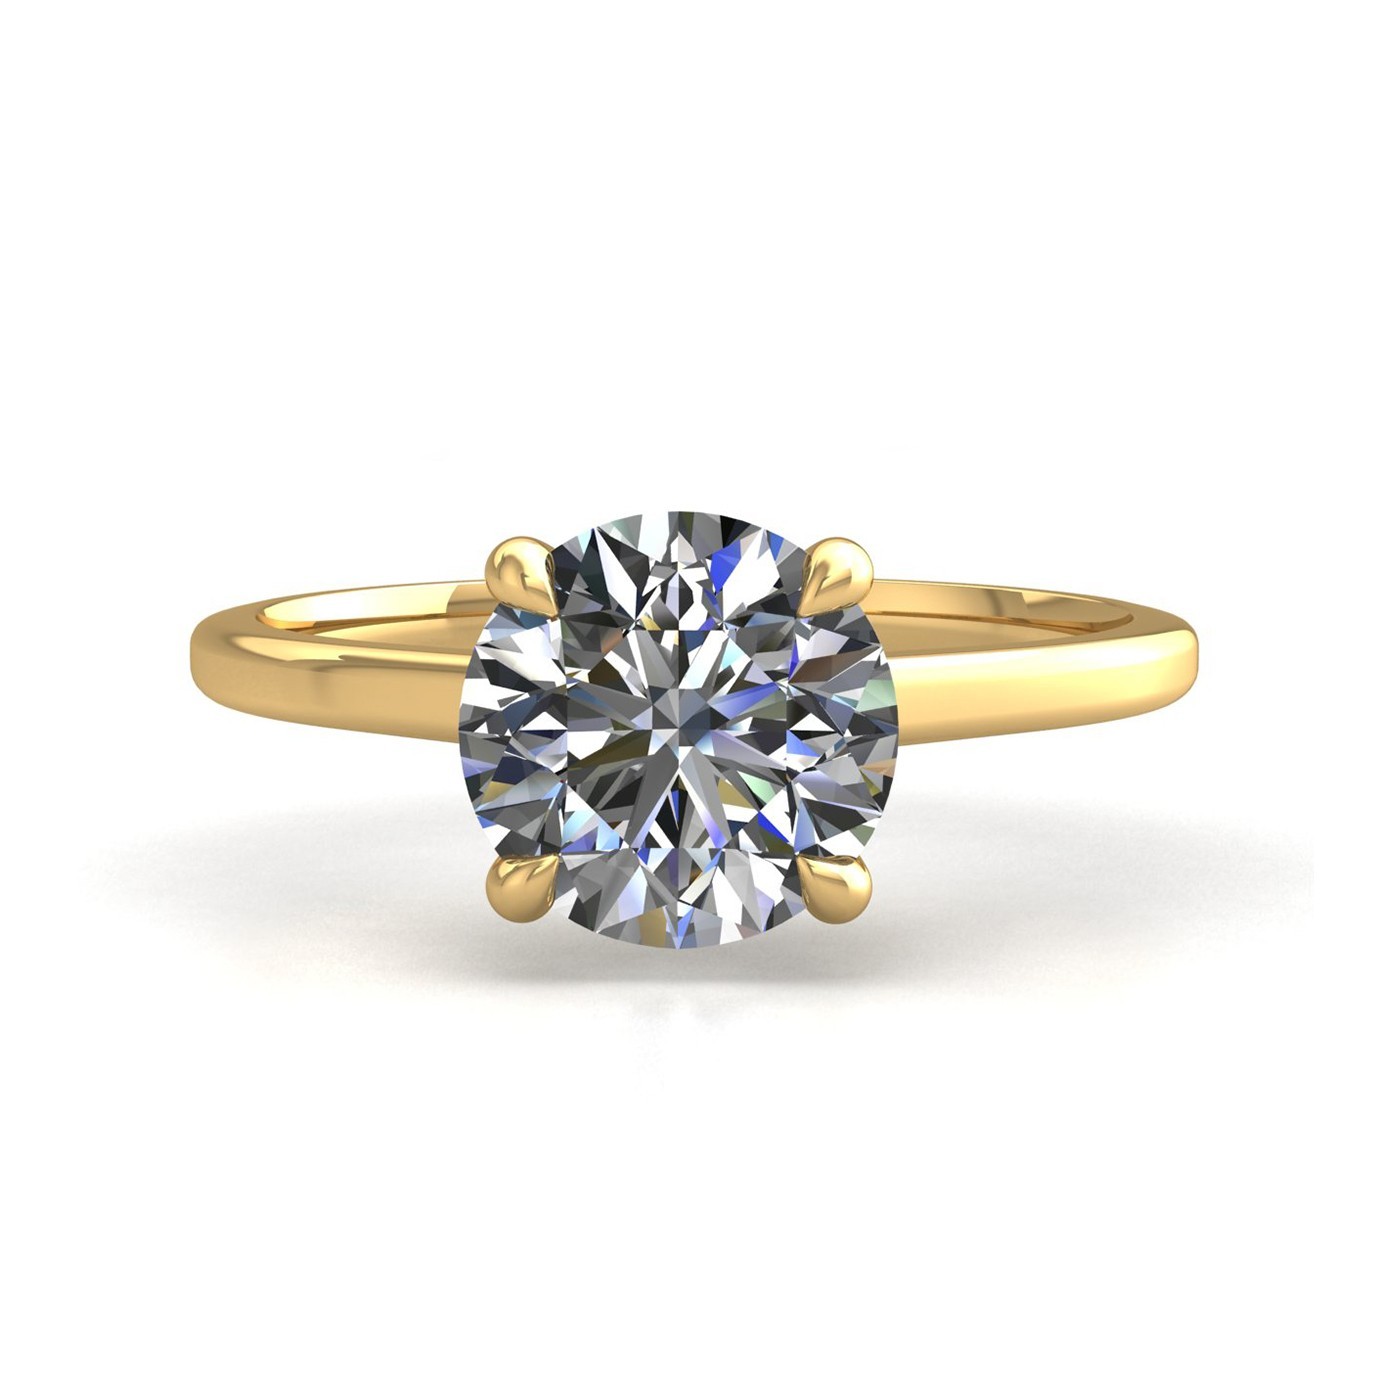 18k yellow gold 0,50 ct 4 prongs solitaire round cut diamond engagement ring with whisper thin band Photos & images